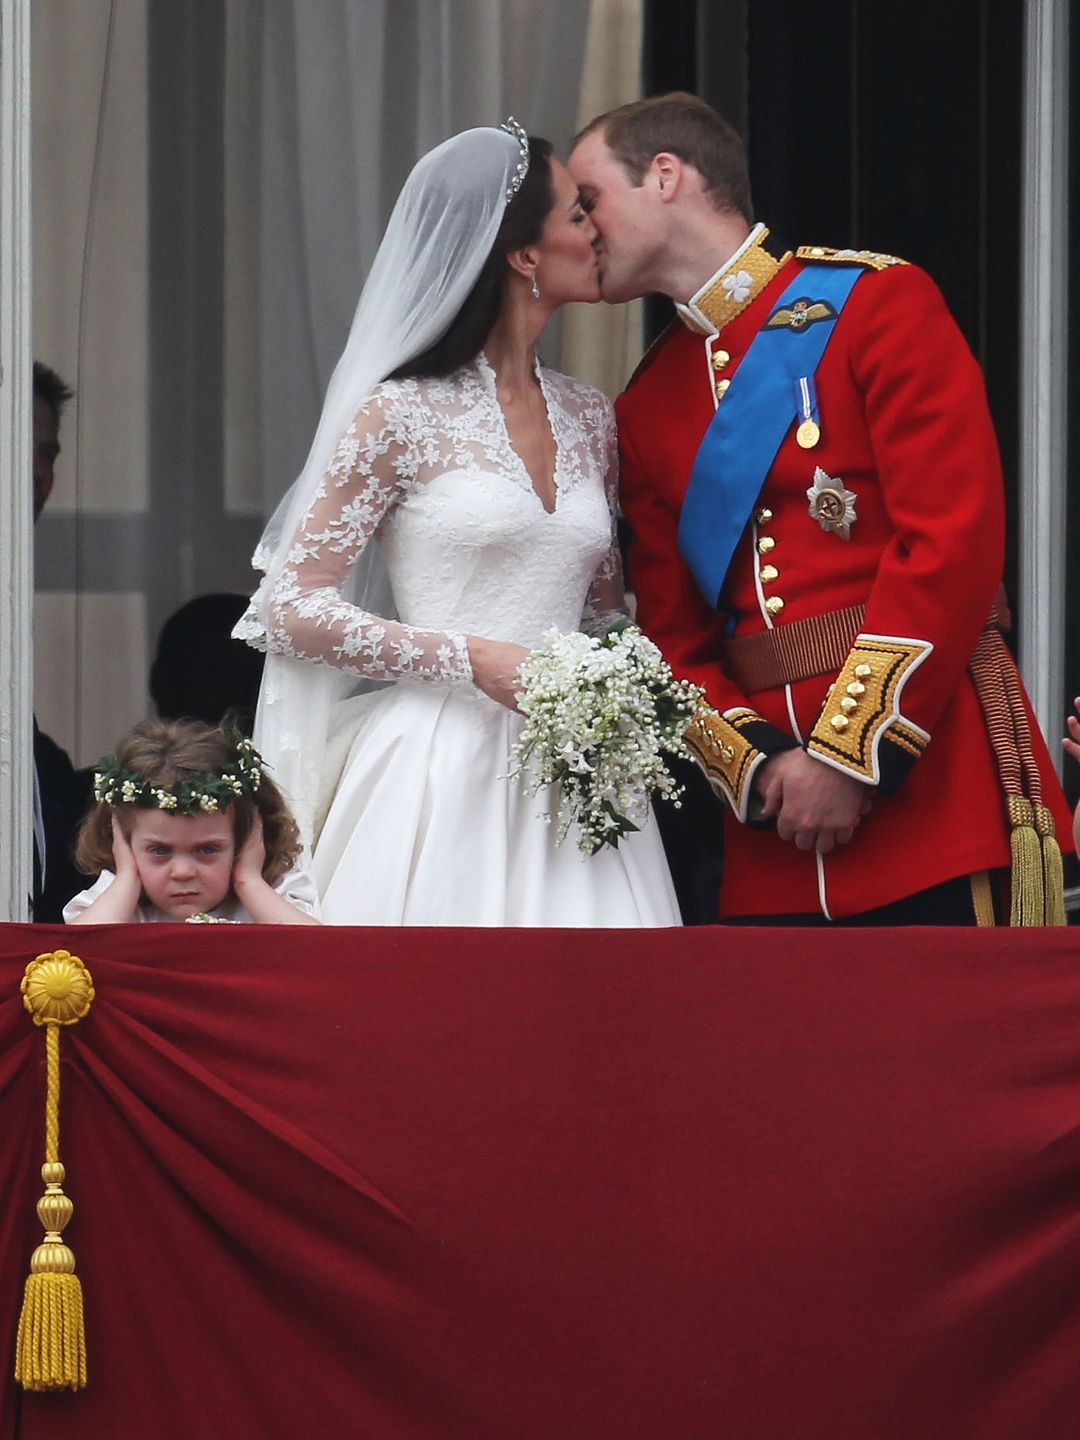 Grace van Custem covering her ears at the Prince and Princess of Wales' royal wedding kiss 